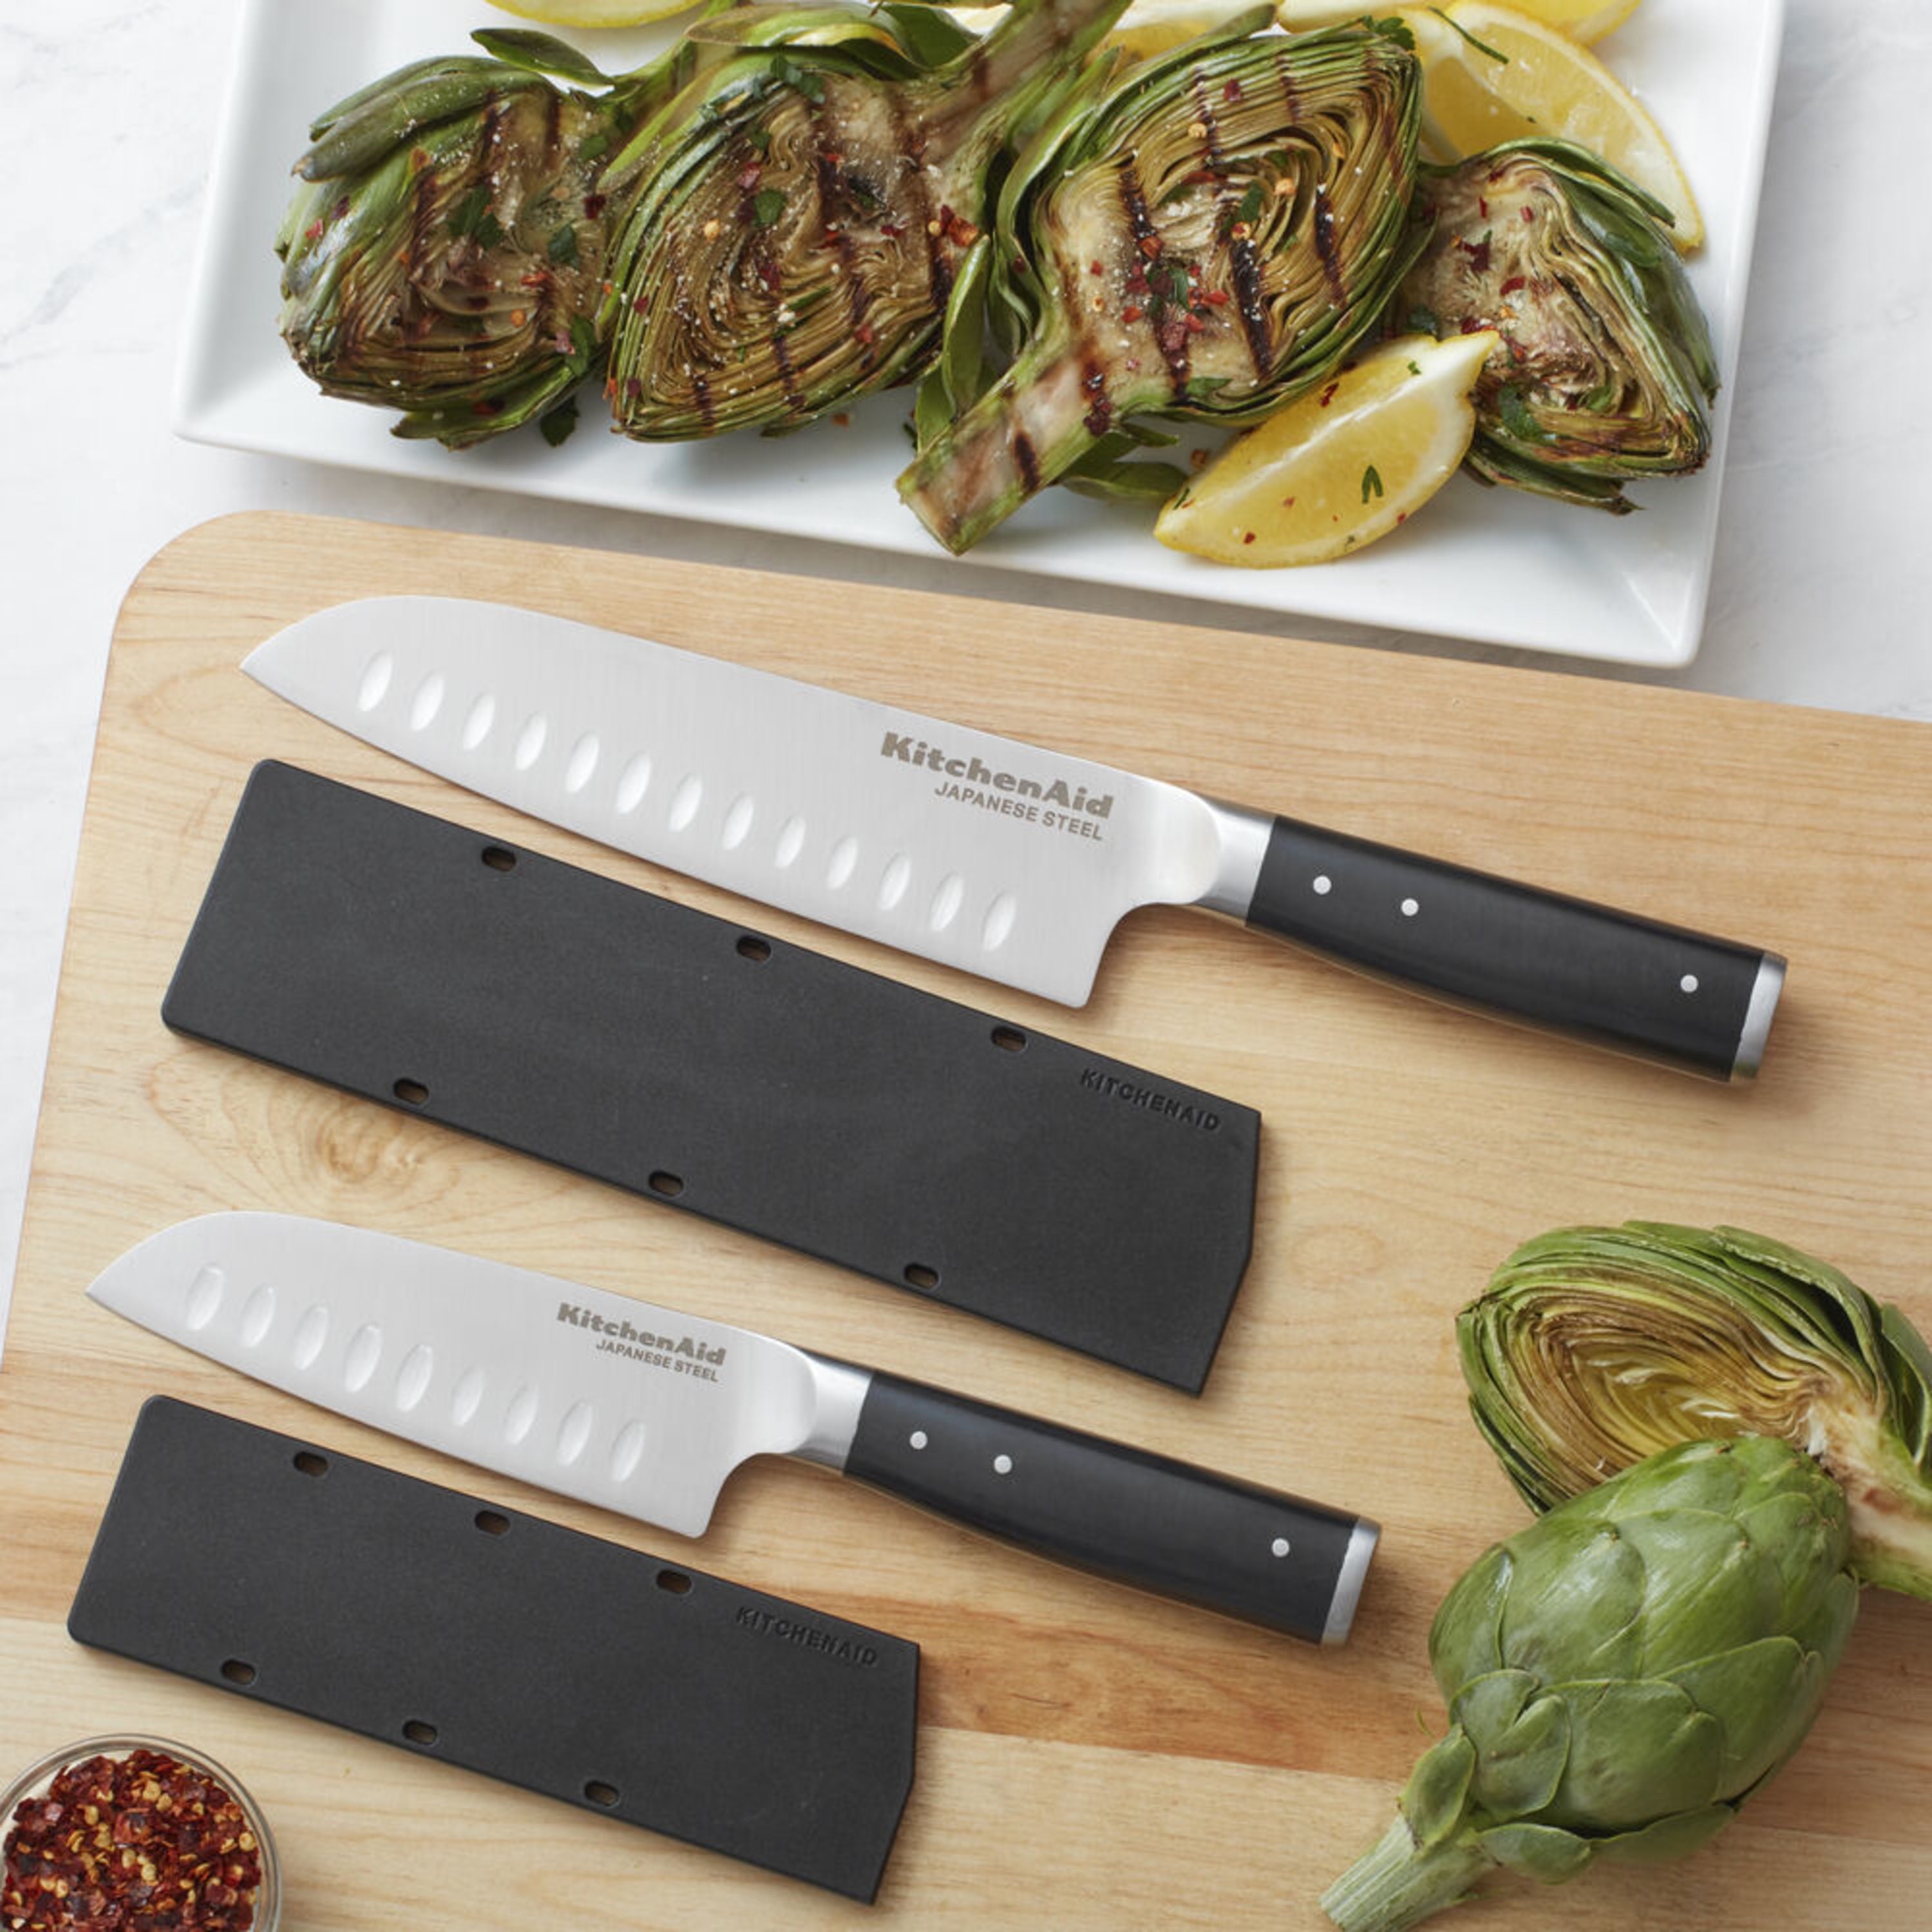 KitchenAid Gourmet 3-Piece Forged Tripe-Riveted Chef Knife Set with Blade Covers, Black